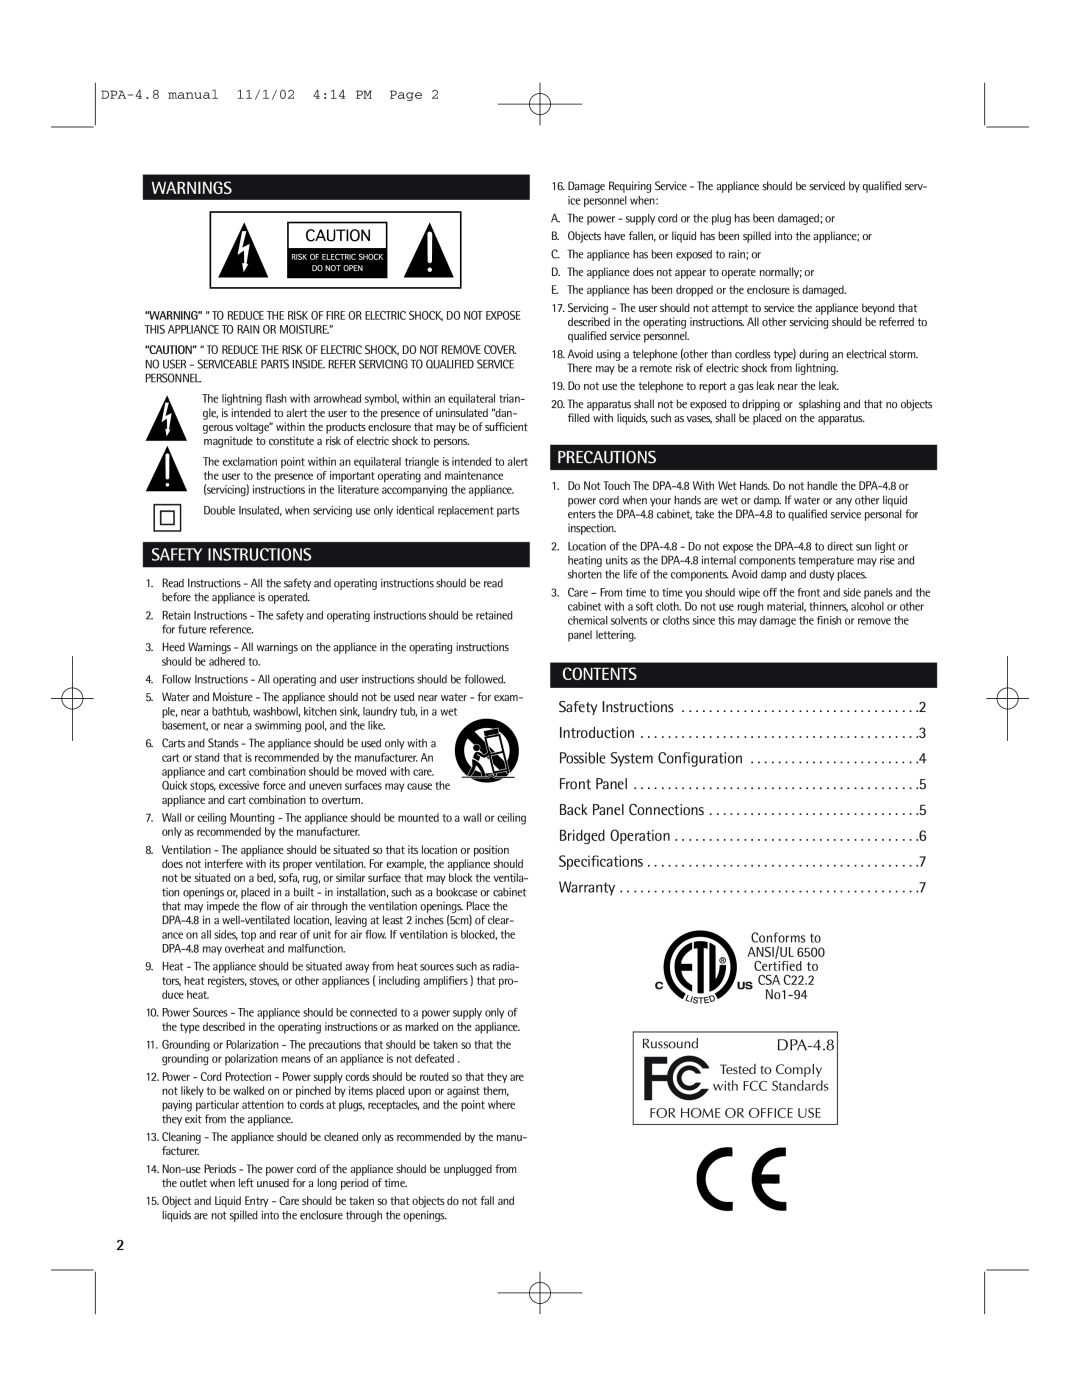 Russound DPA-4.8 Warnings, Safety Instructions, Precautions, Contents, Conforms to ANSI/UL Certified to CSA C22.2 No1-94 